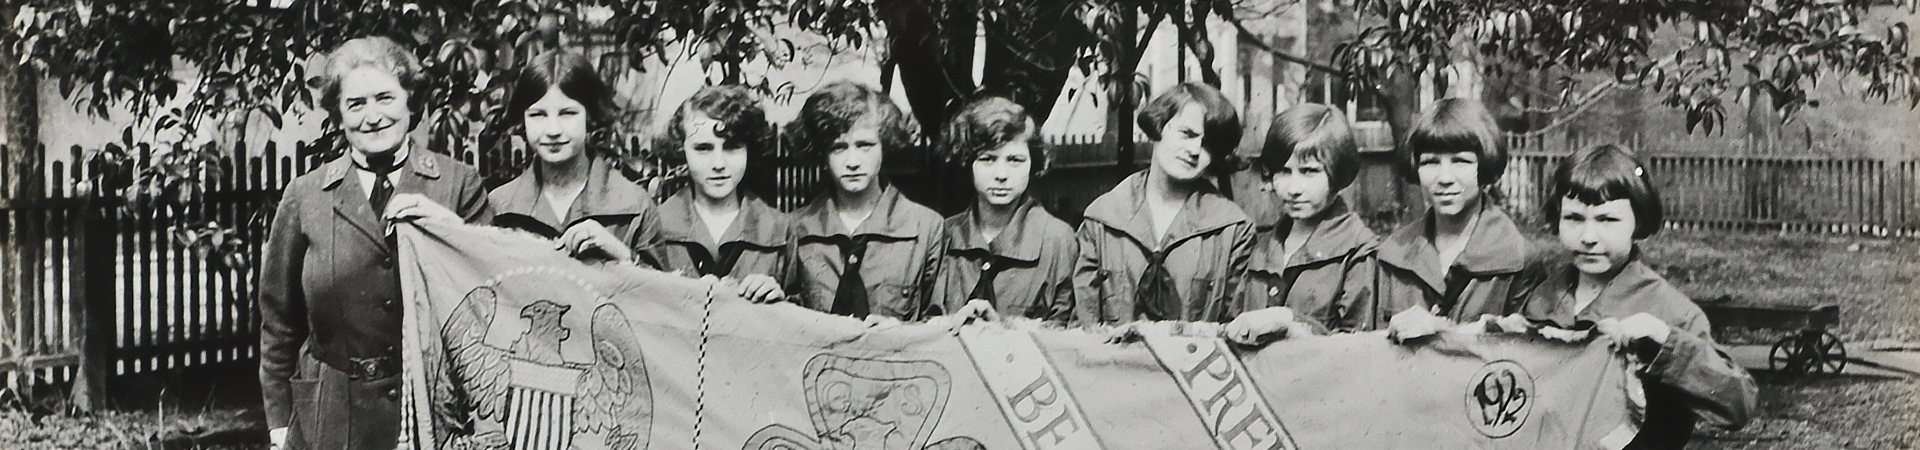  Eight Girl Scouts standing next to Juliette Gordon Low holding a Girl Scout banner.  